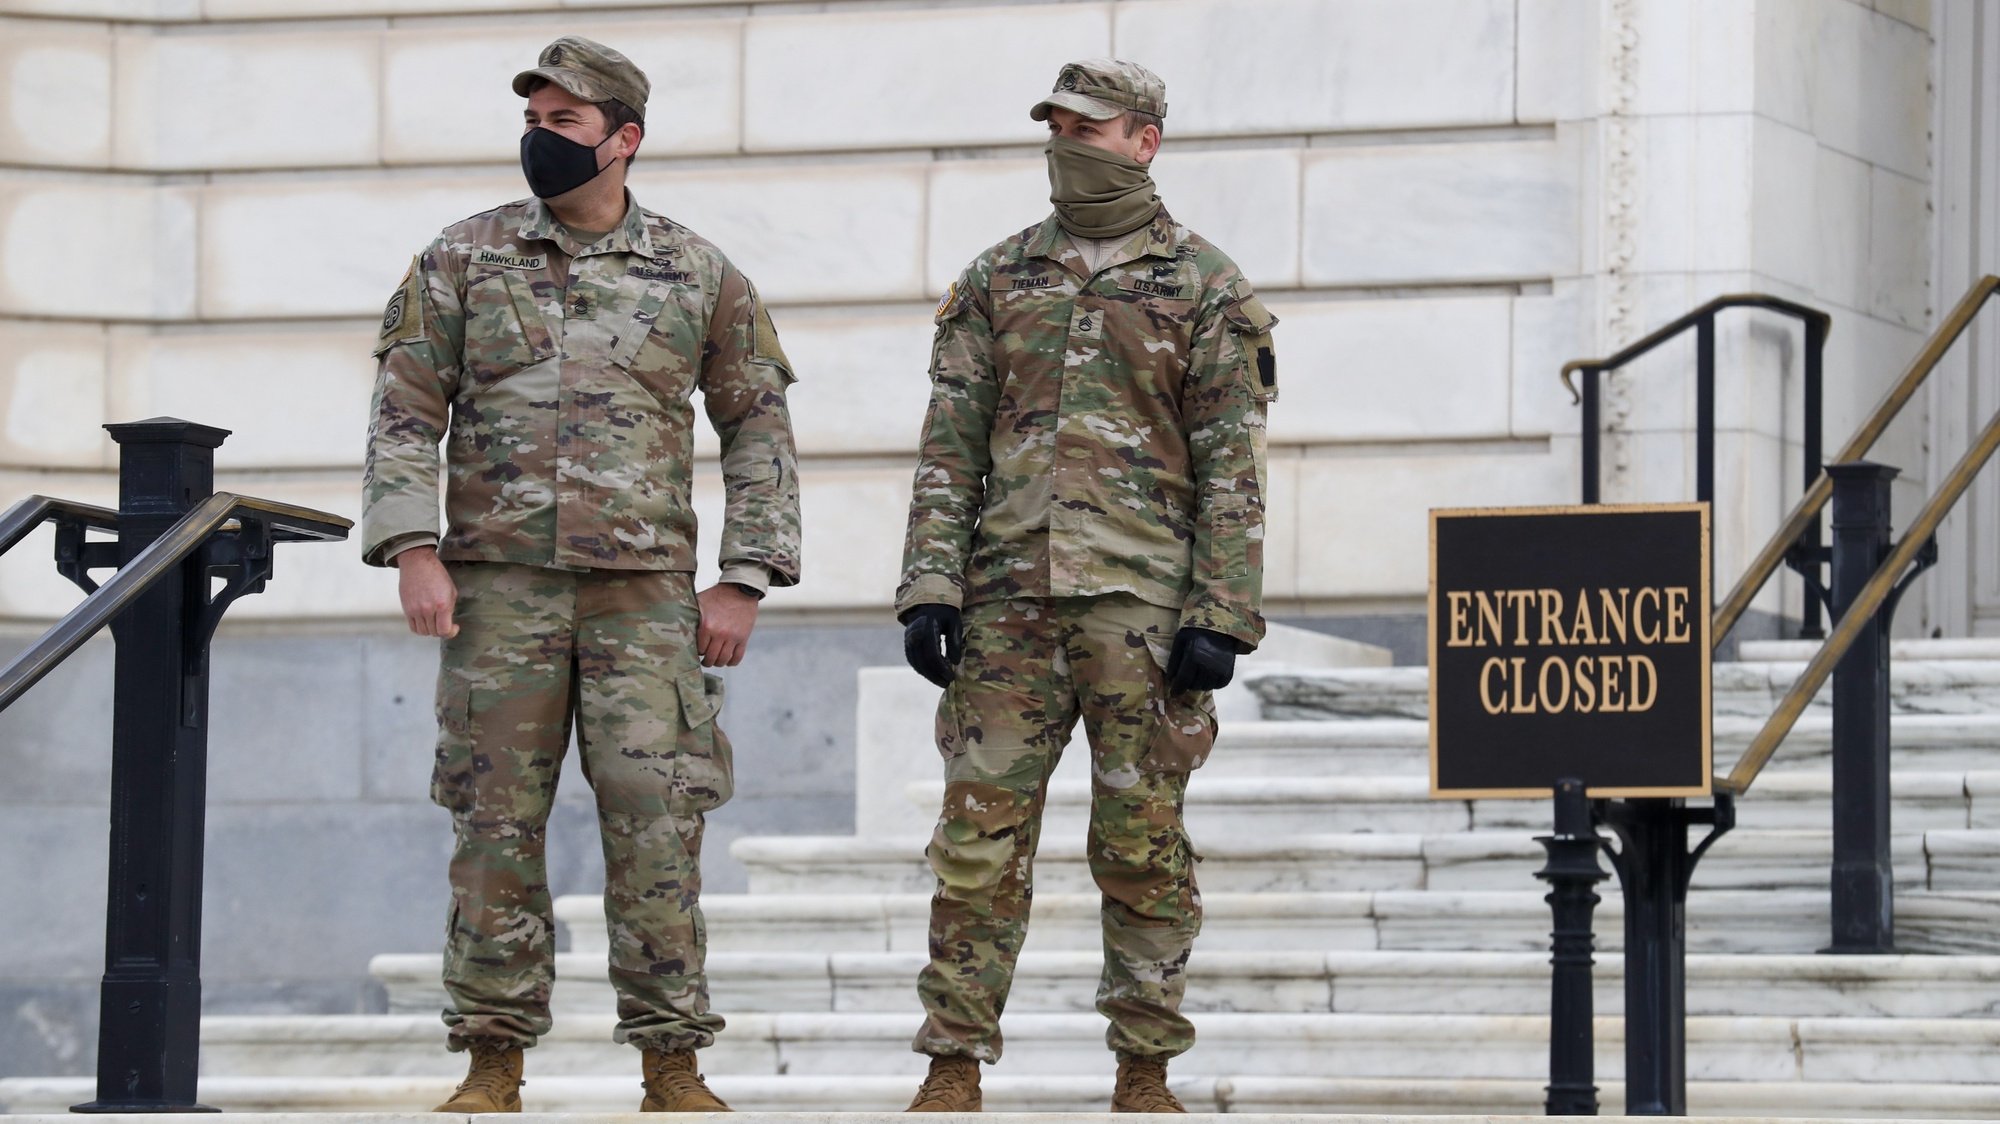 epa08931876 National Guard soldiers stand guard at the US Capitol in Washington, DC, USA, 11 January 2021. Speaker of the House Nancy Pelosi plans to introduce articles of impeachment against US President Donald J. Trump for incitement of insurrection following the attack on the US Capitol on 06 January as lawmakers worked to certify Joe Biden as the next President of the United States.  EPA/SHAWN THEW